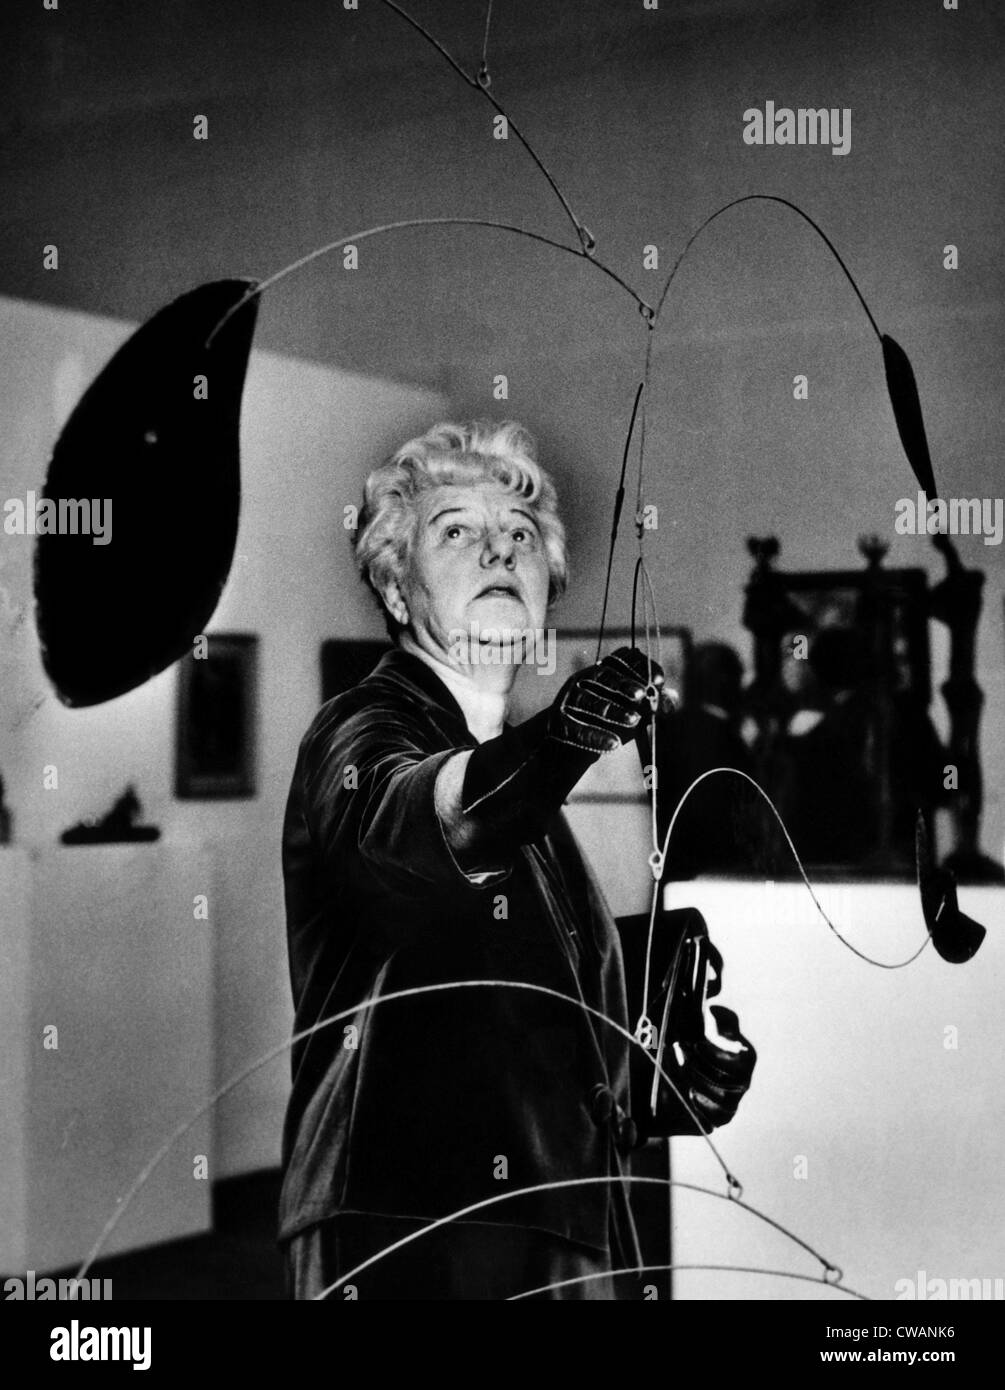 Peggy Guggenheim adjusts Alexander Calder's 'Mobile' at a special exhibit of her famed collection of art at the Tate Gallery, Stock Photo